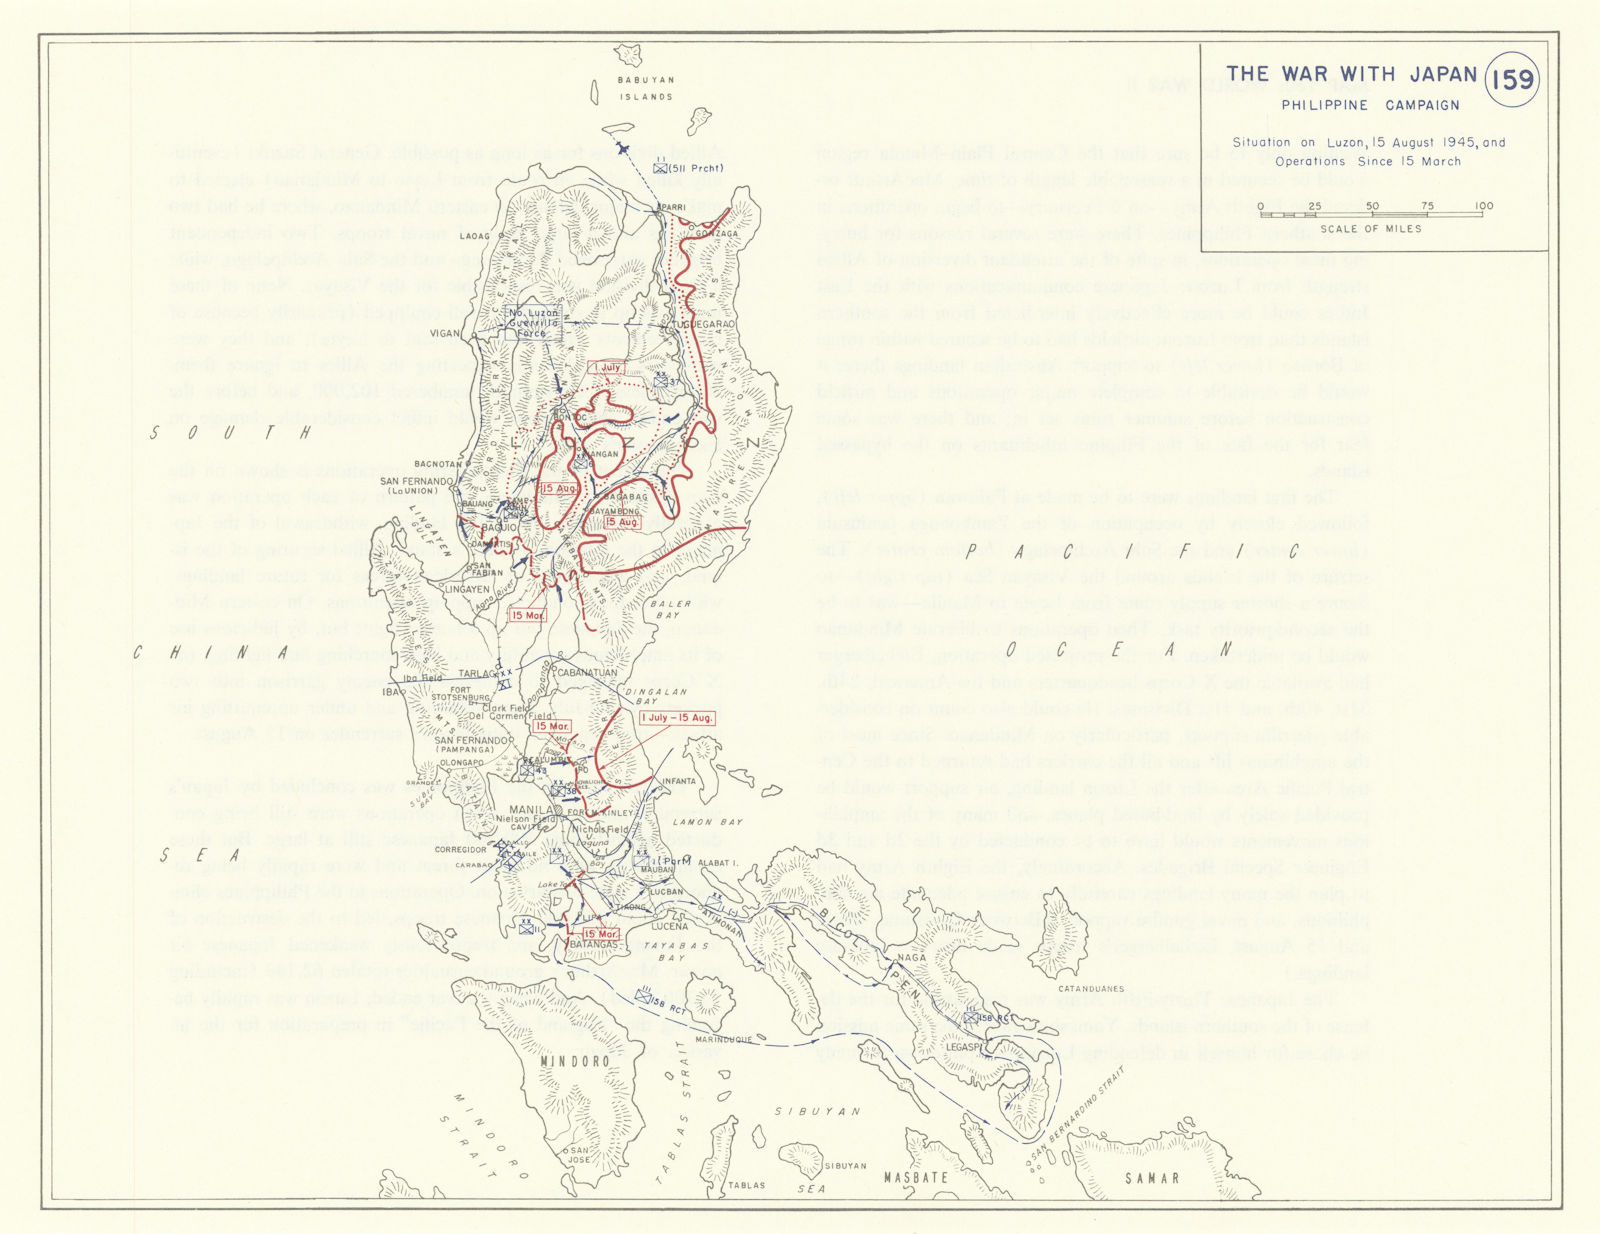 World War 2. Philippine Campaign. March-August 1945 Luzon Operations 1959 map